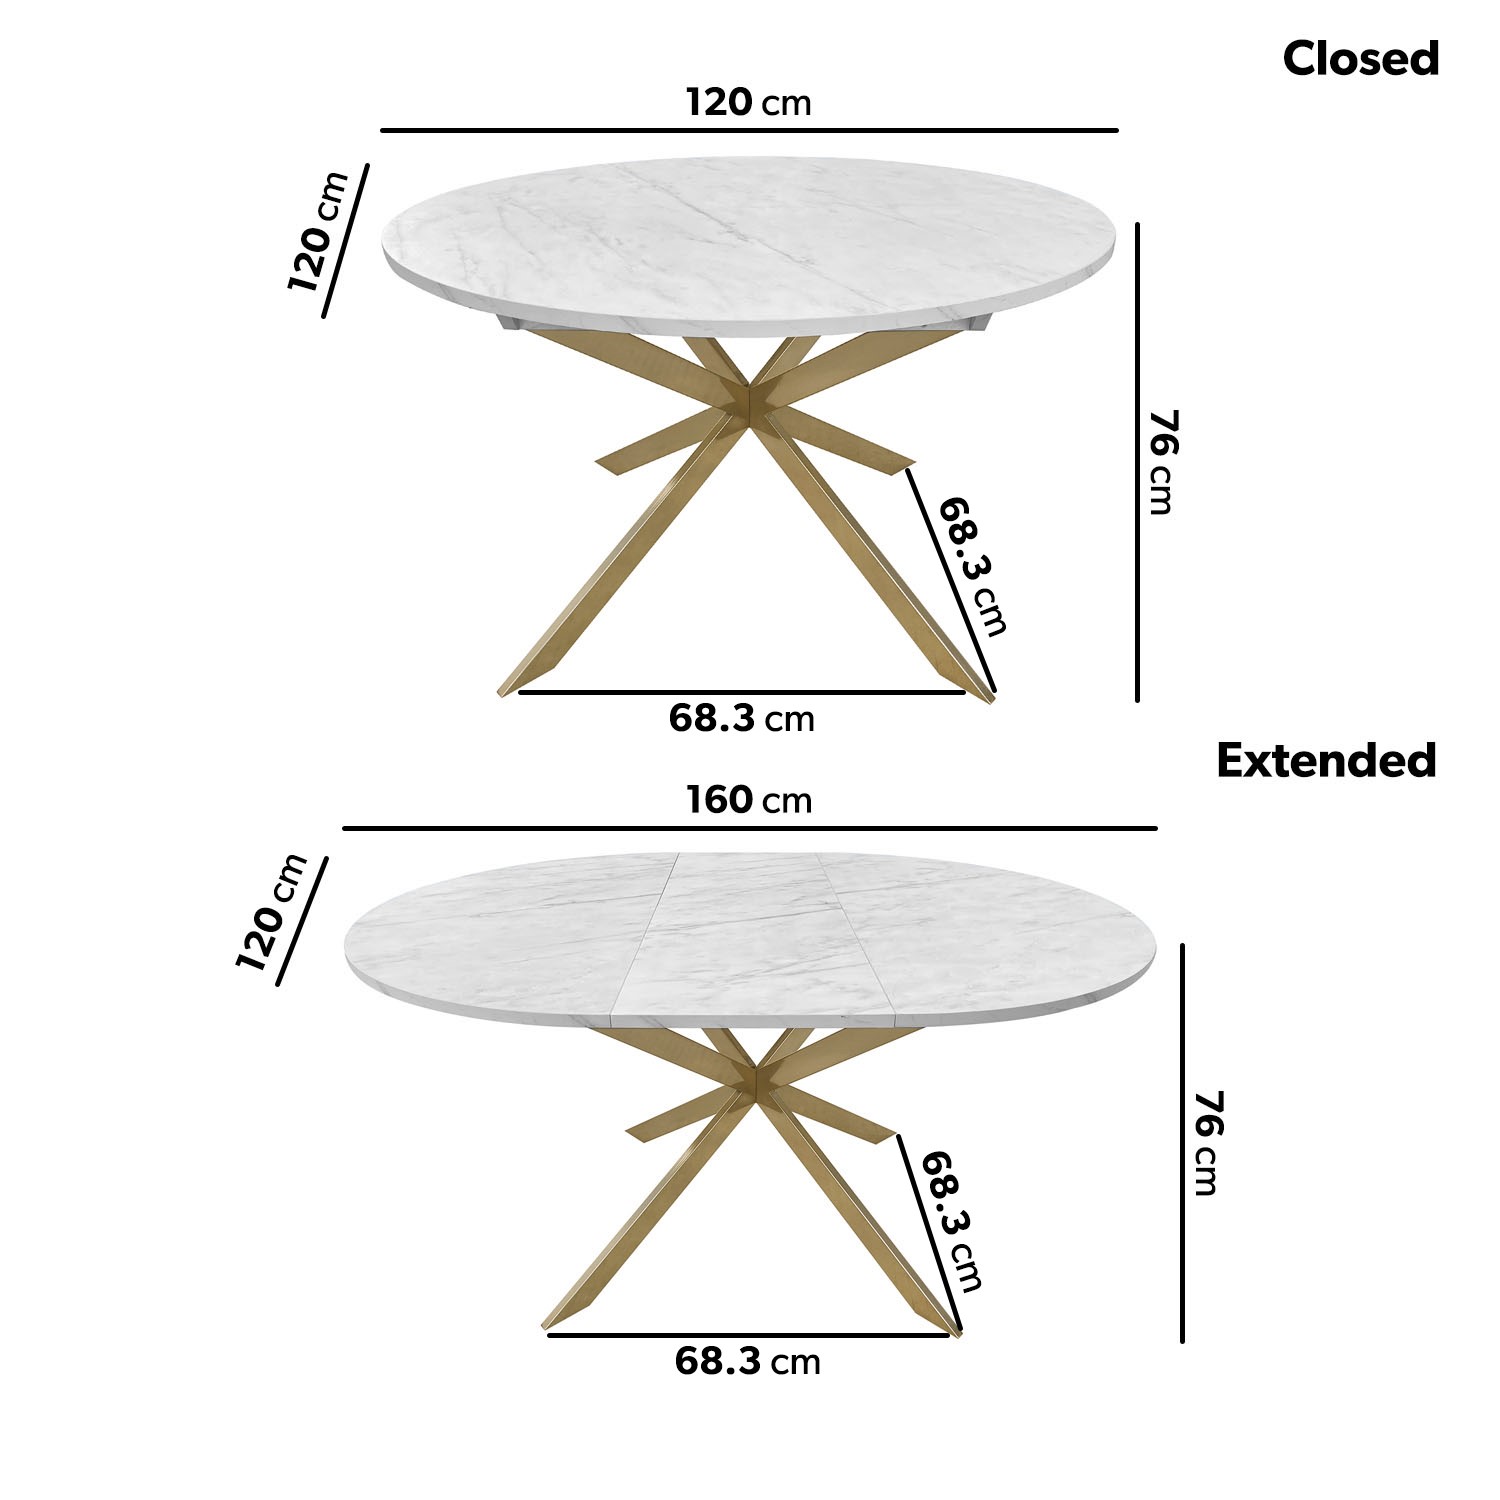 Read more about Round to oval marble effect extendable dining table in white seats 4-6 reine